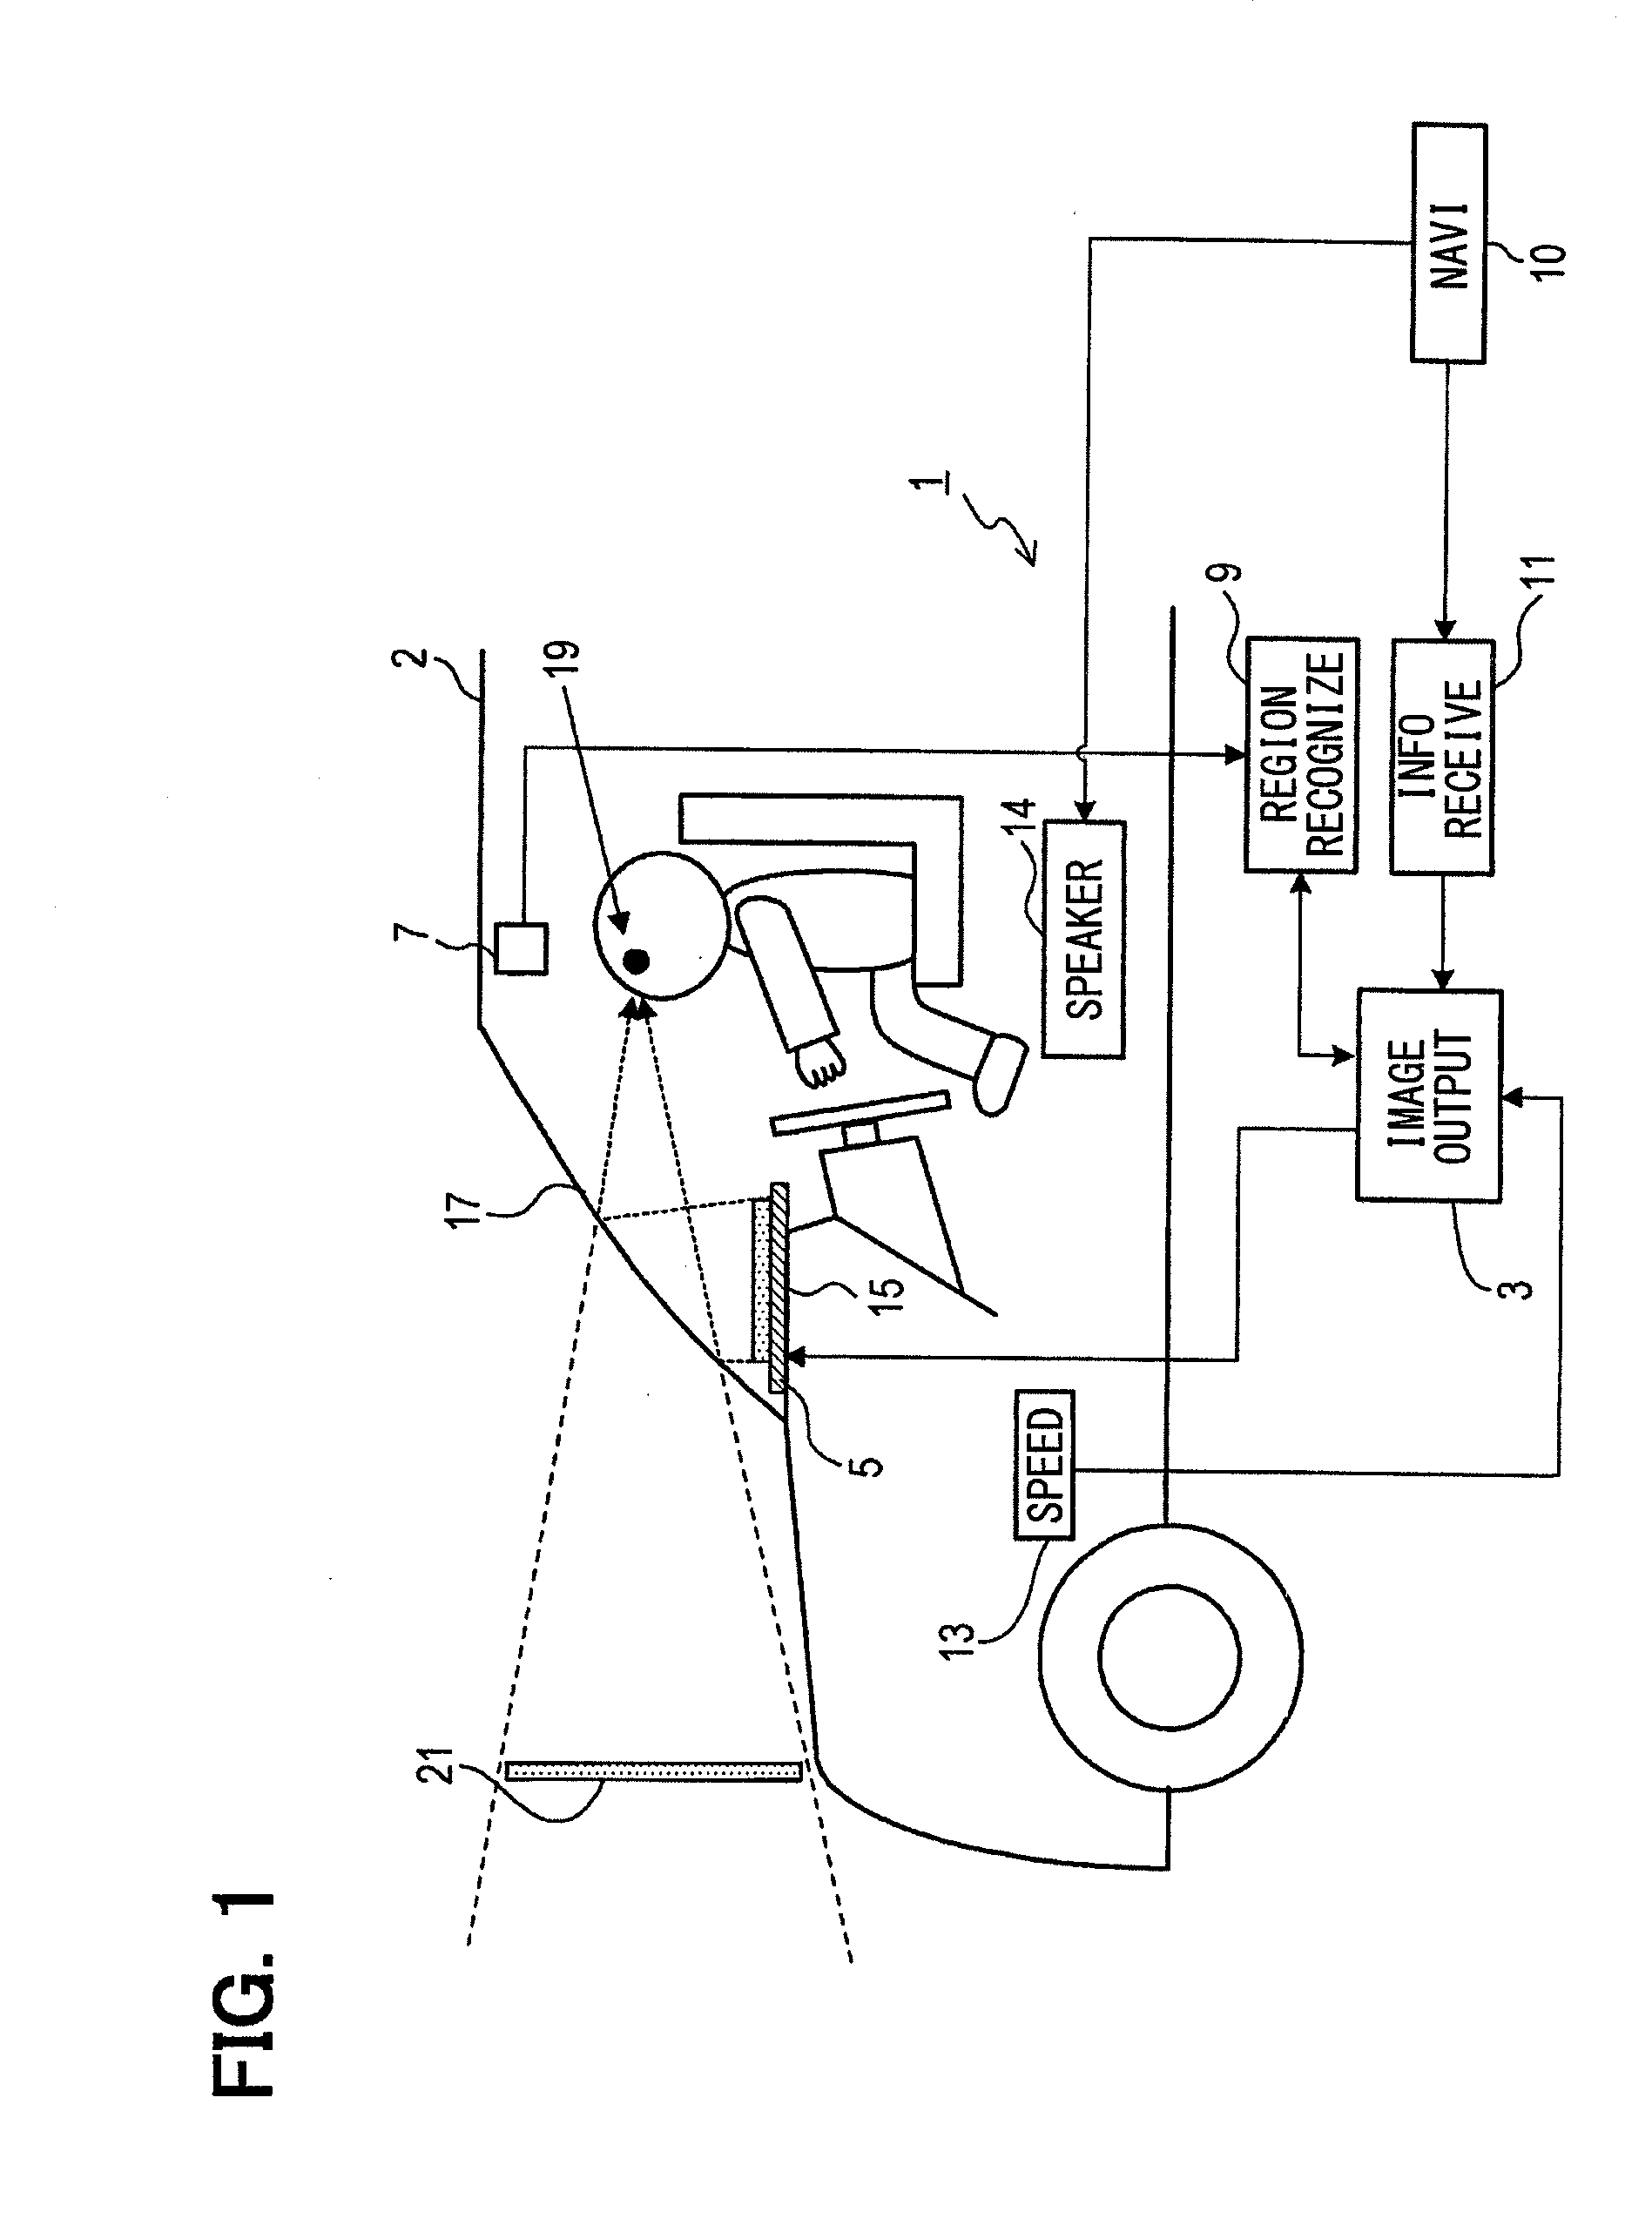 In-vehicle display apparatus and program product